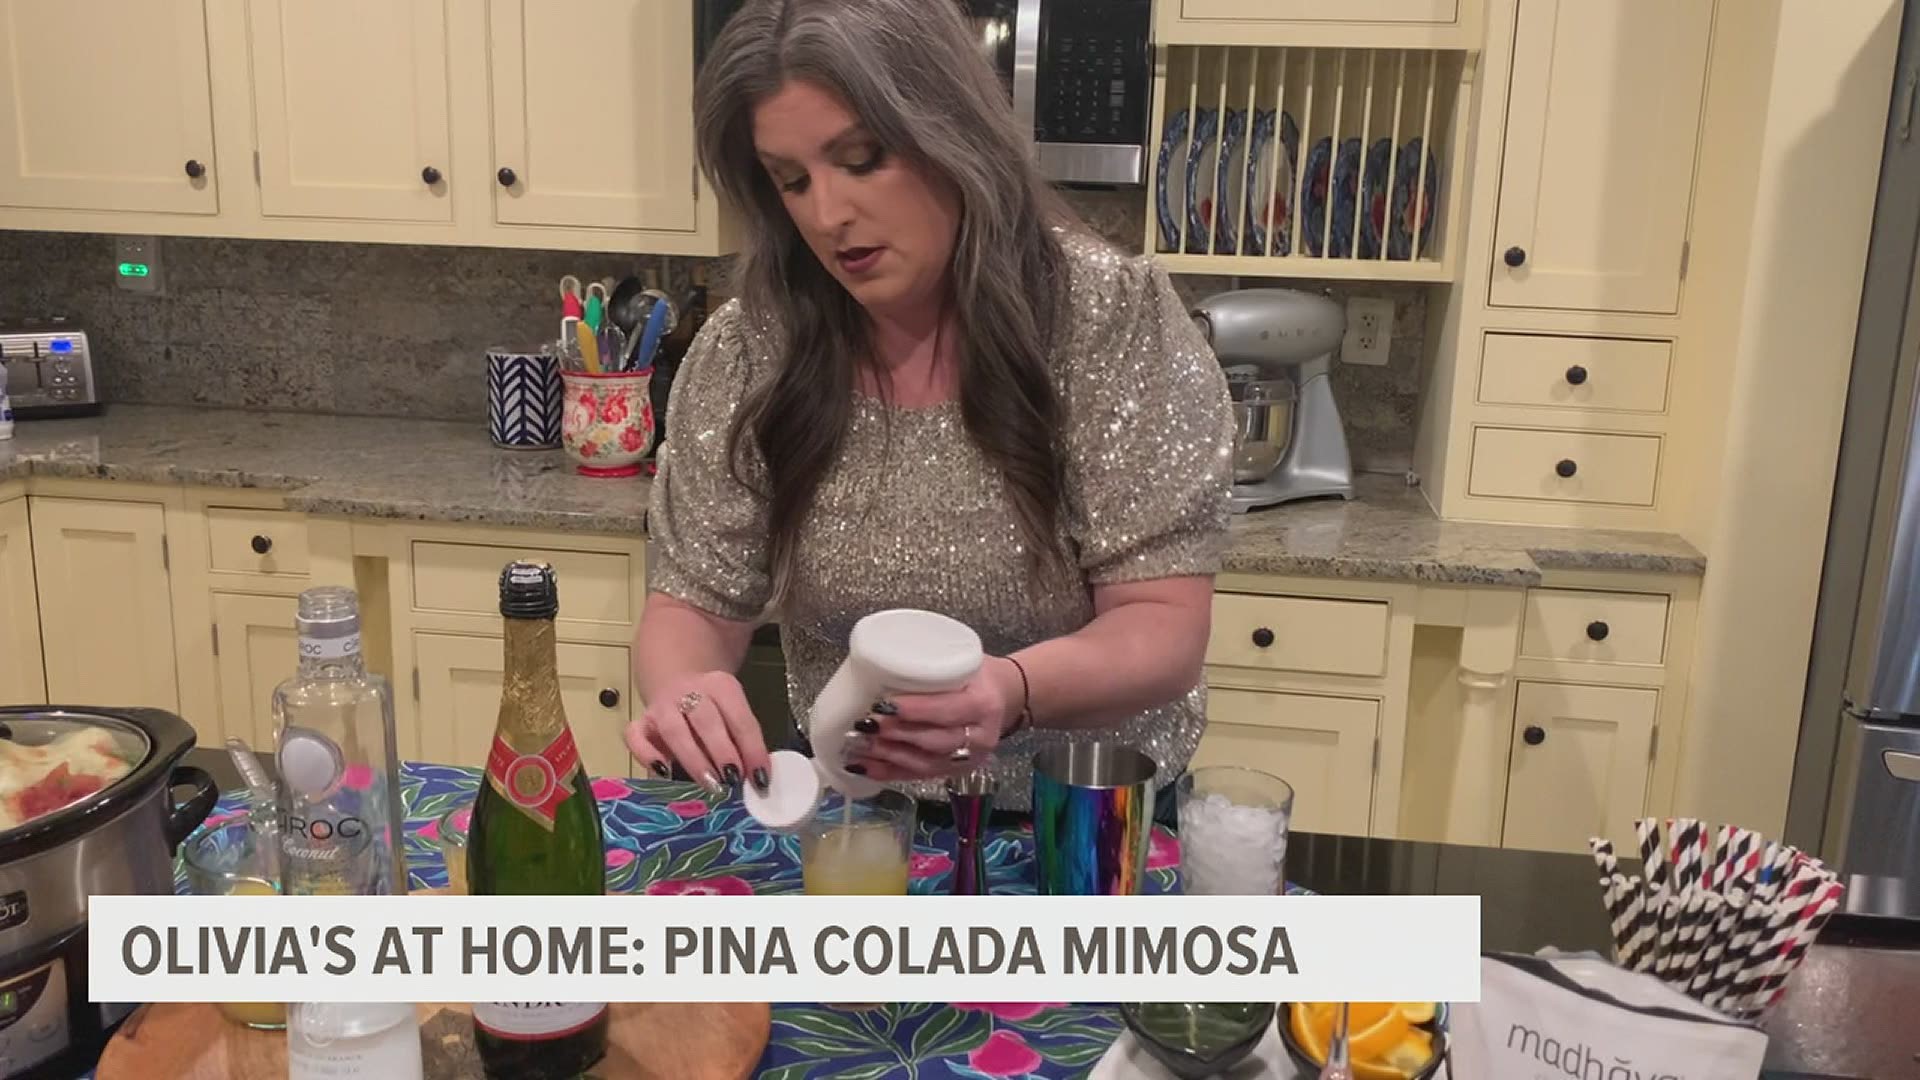 It's time to check back in with Olivia's. Adrienne has the perfect cocktail for a refreshing start to 2021, Pina Colada Mimosas.